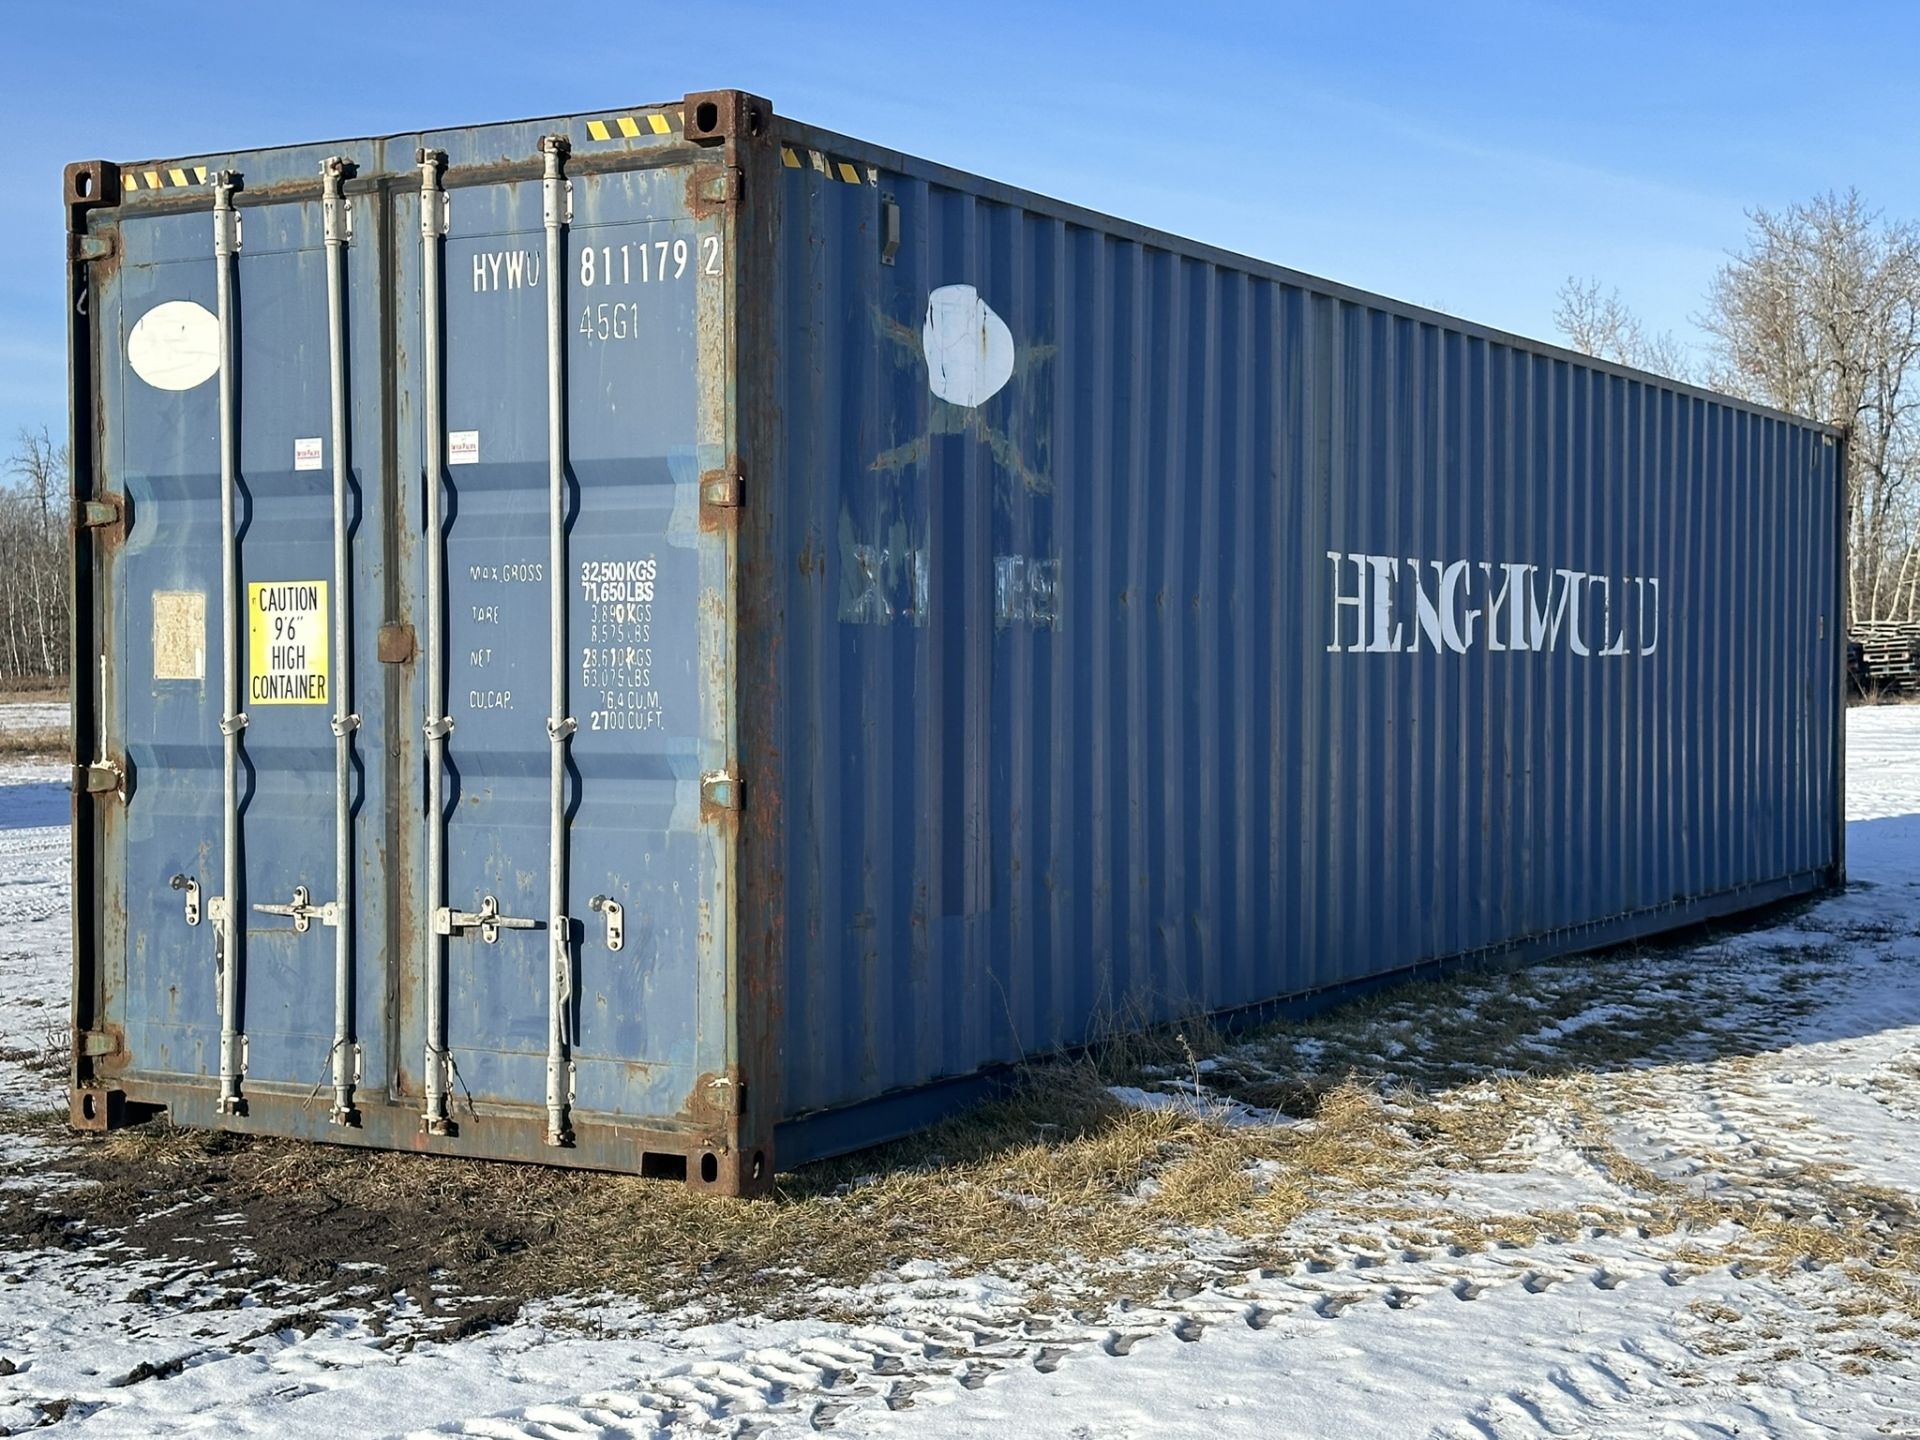 2010 40 FT HIGH CUBE SEA CONTAINER S/N HYWU8111792 - Image 2 of 9